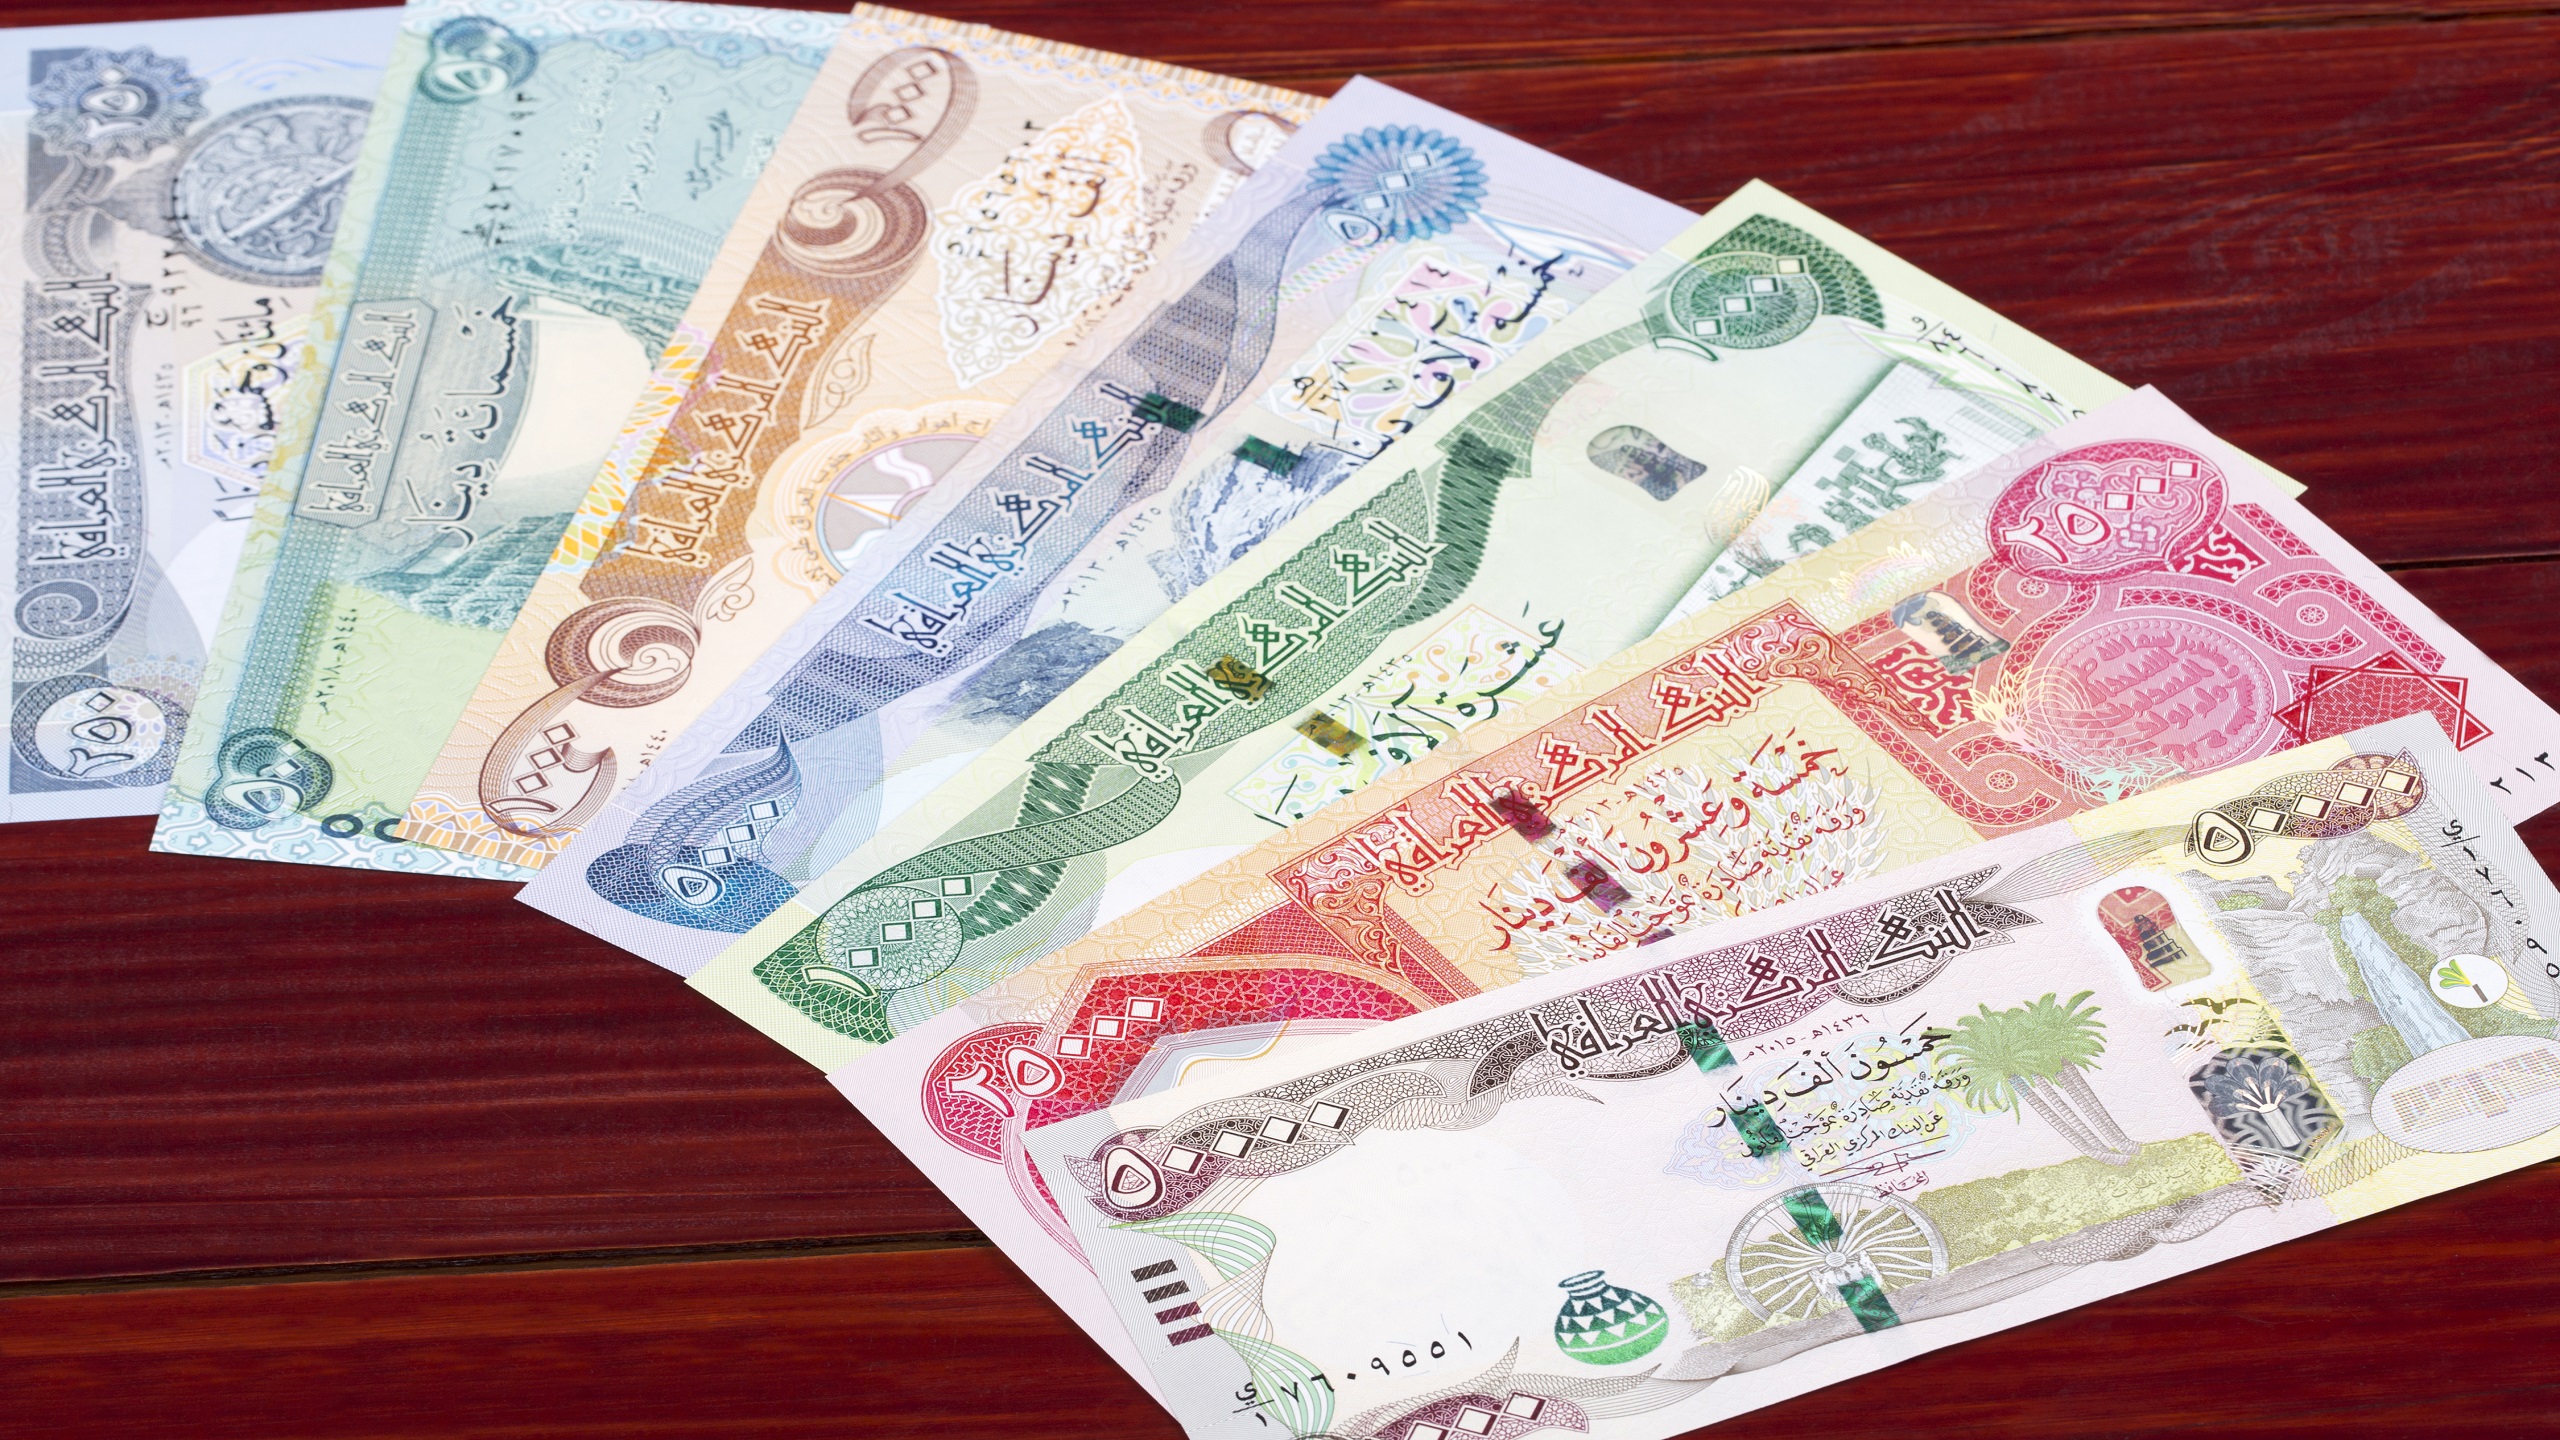 Iraqi Gov’t Boosts Dinar Value To Stabilize Currency Market